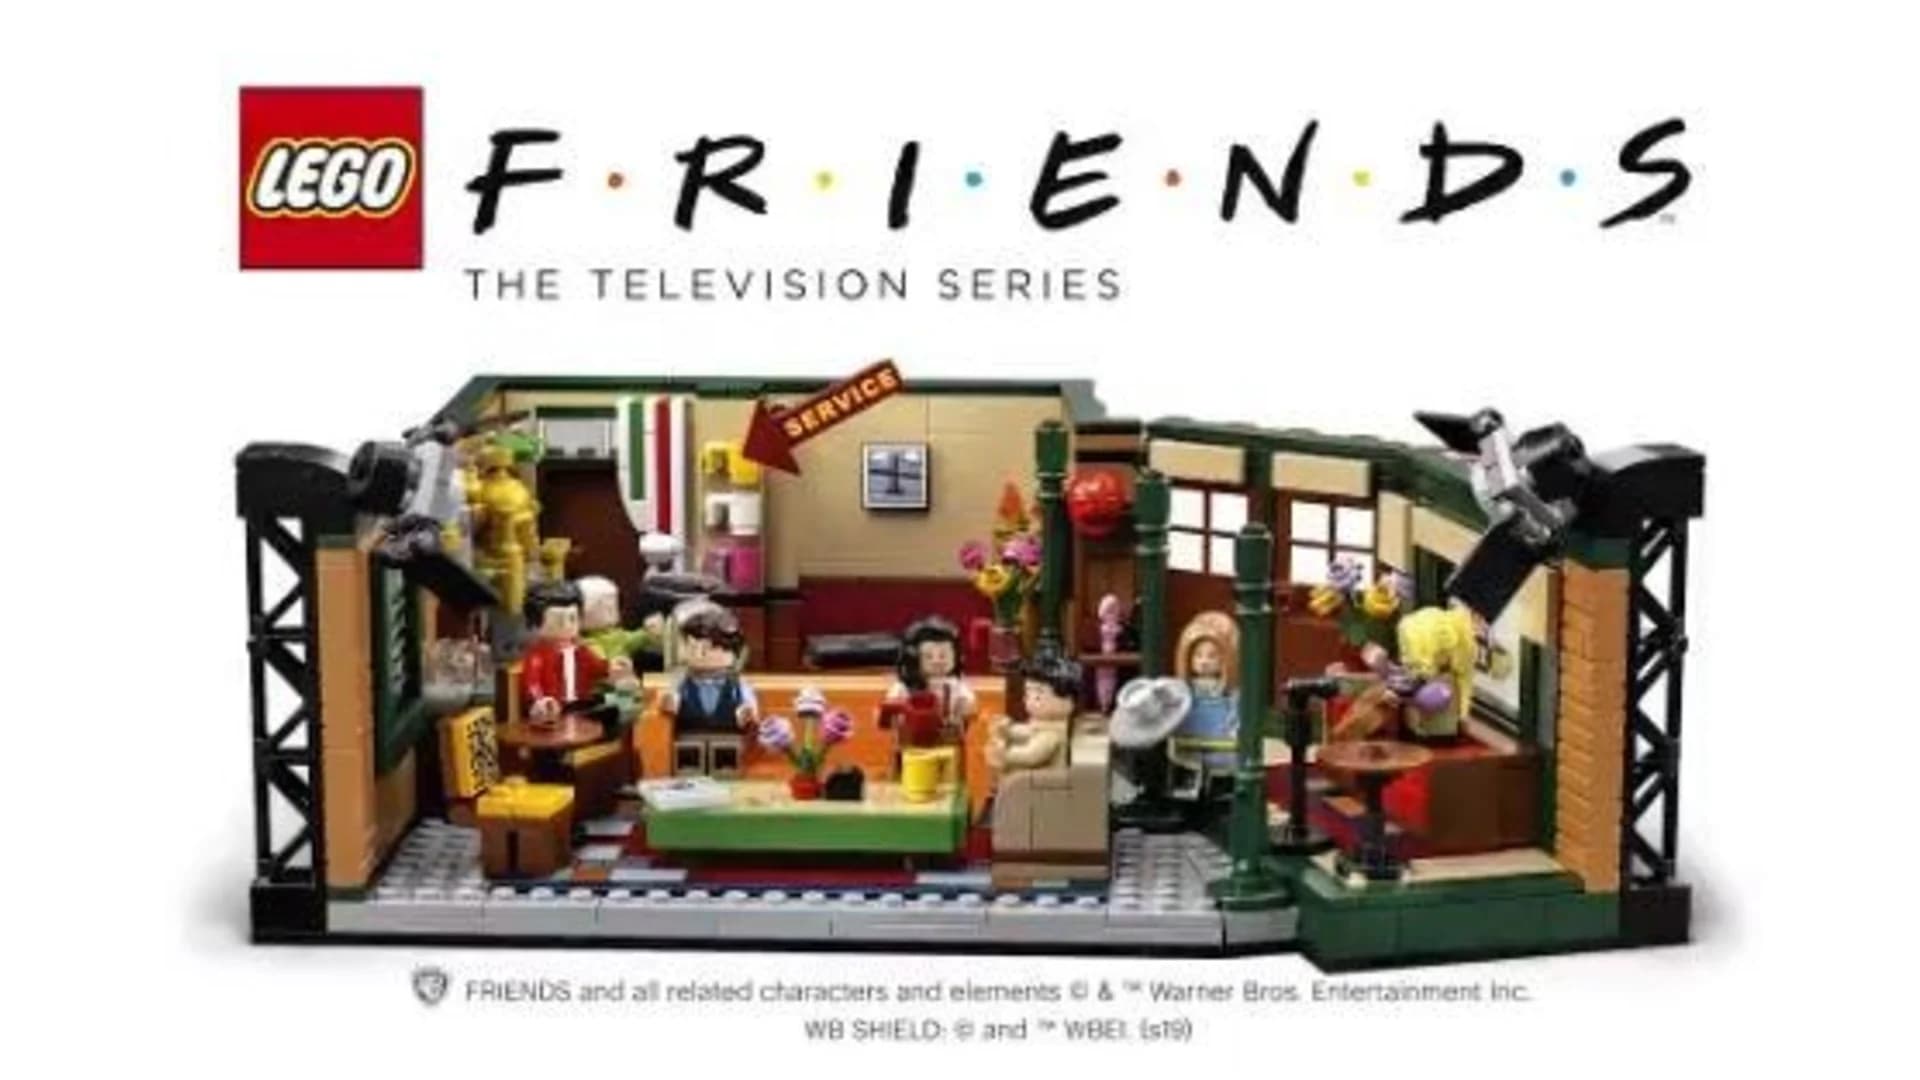 LEGO teases fans with 'Friends' kit